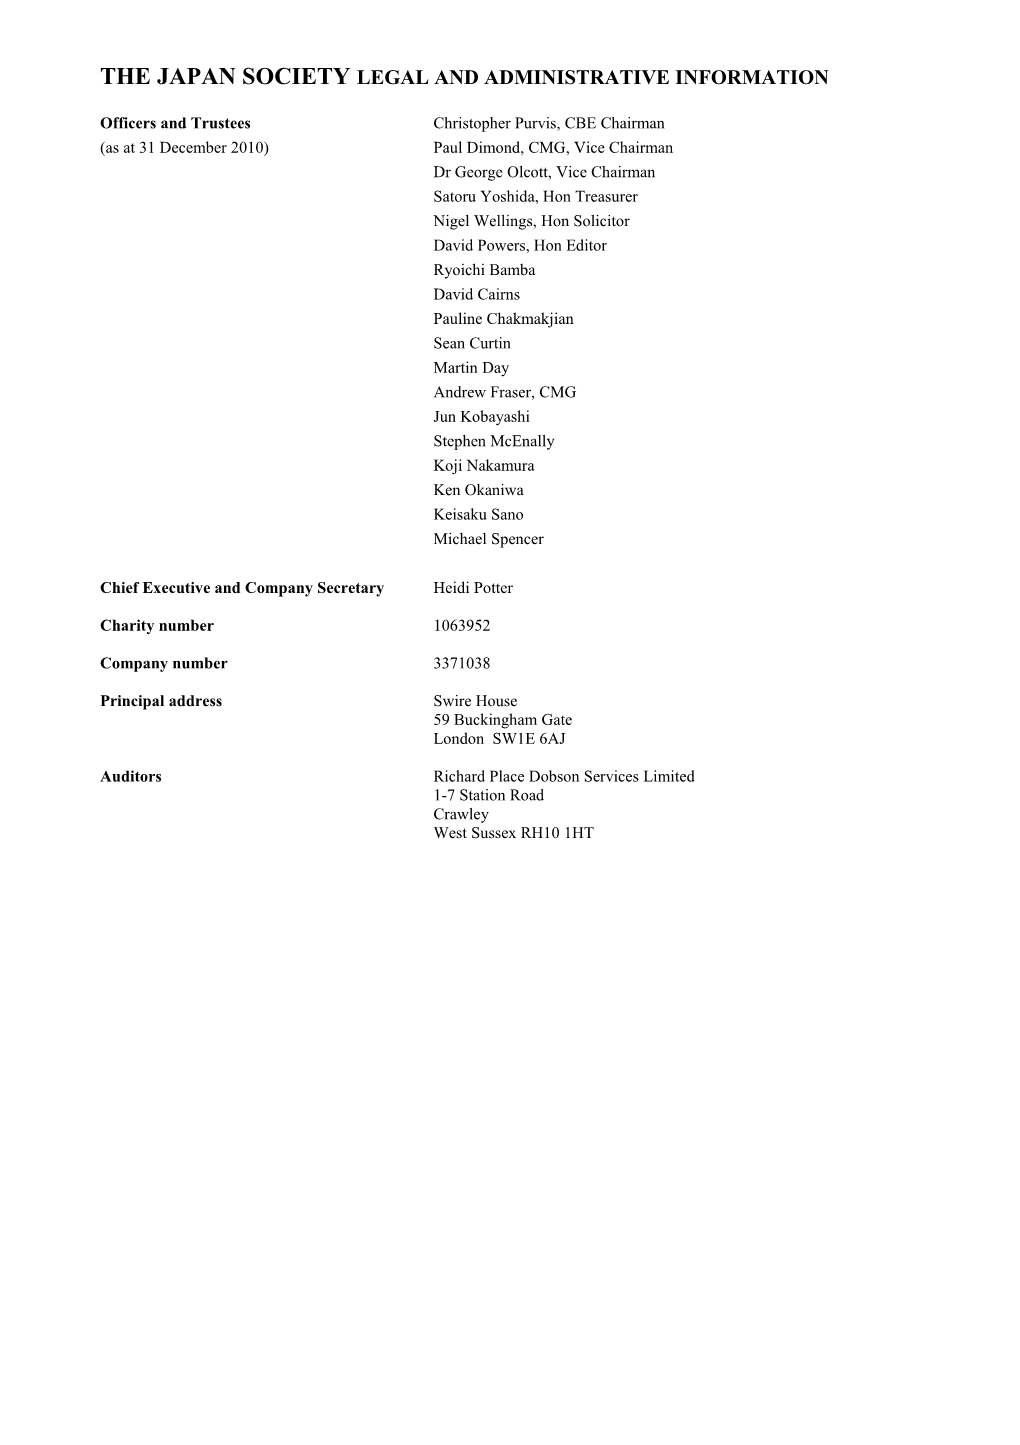 Draft Financial Statements at 27 MARCH 2008 at 00:02:05